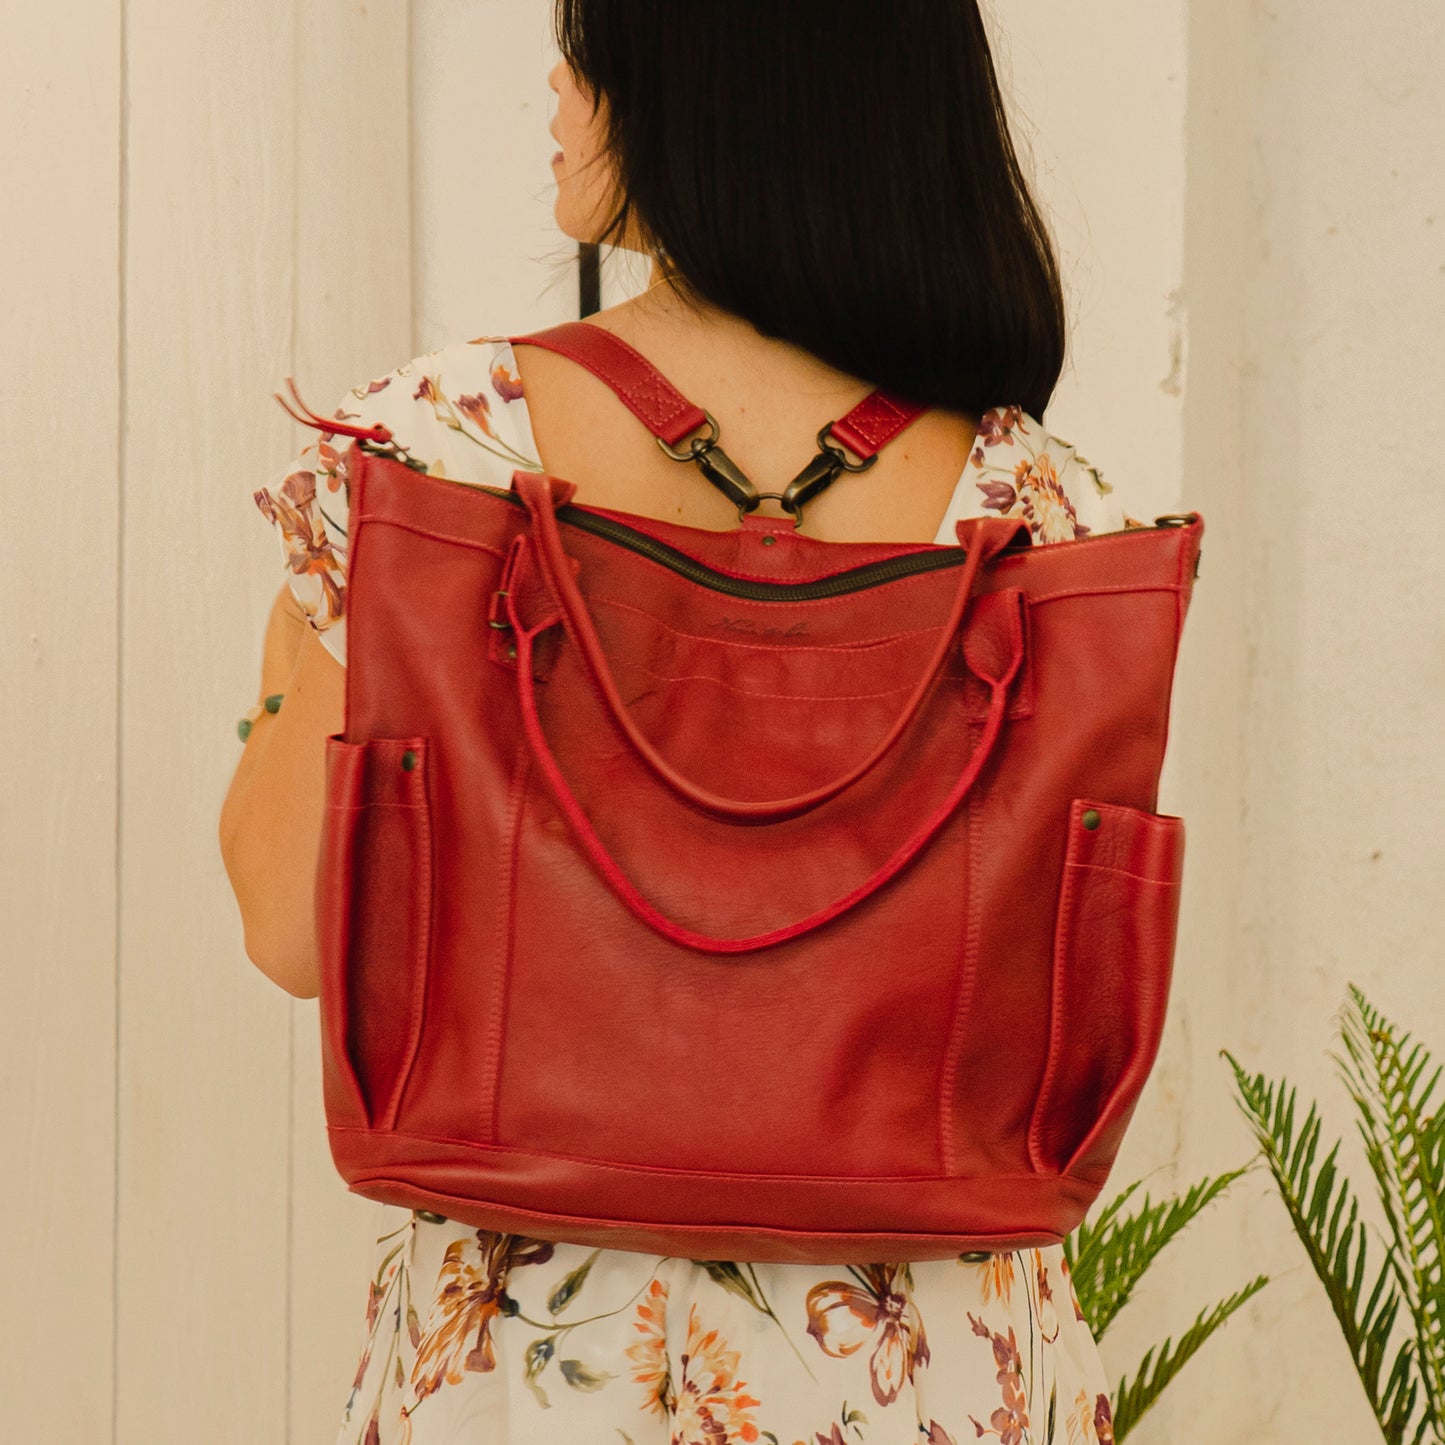 THE PERFECT BAG - FULL LEATHER - ROUGE